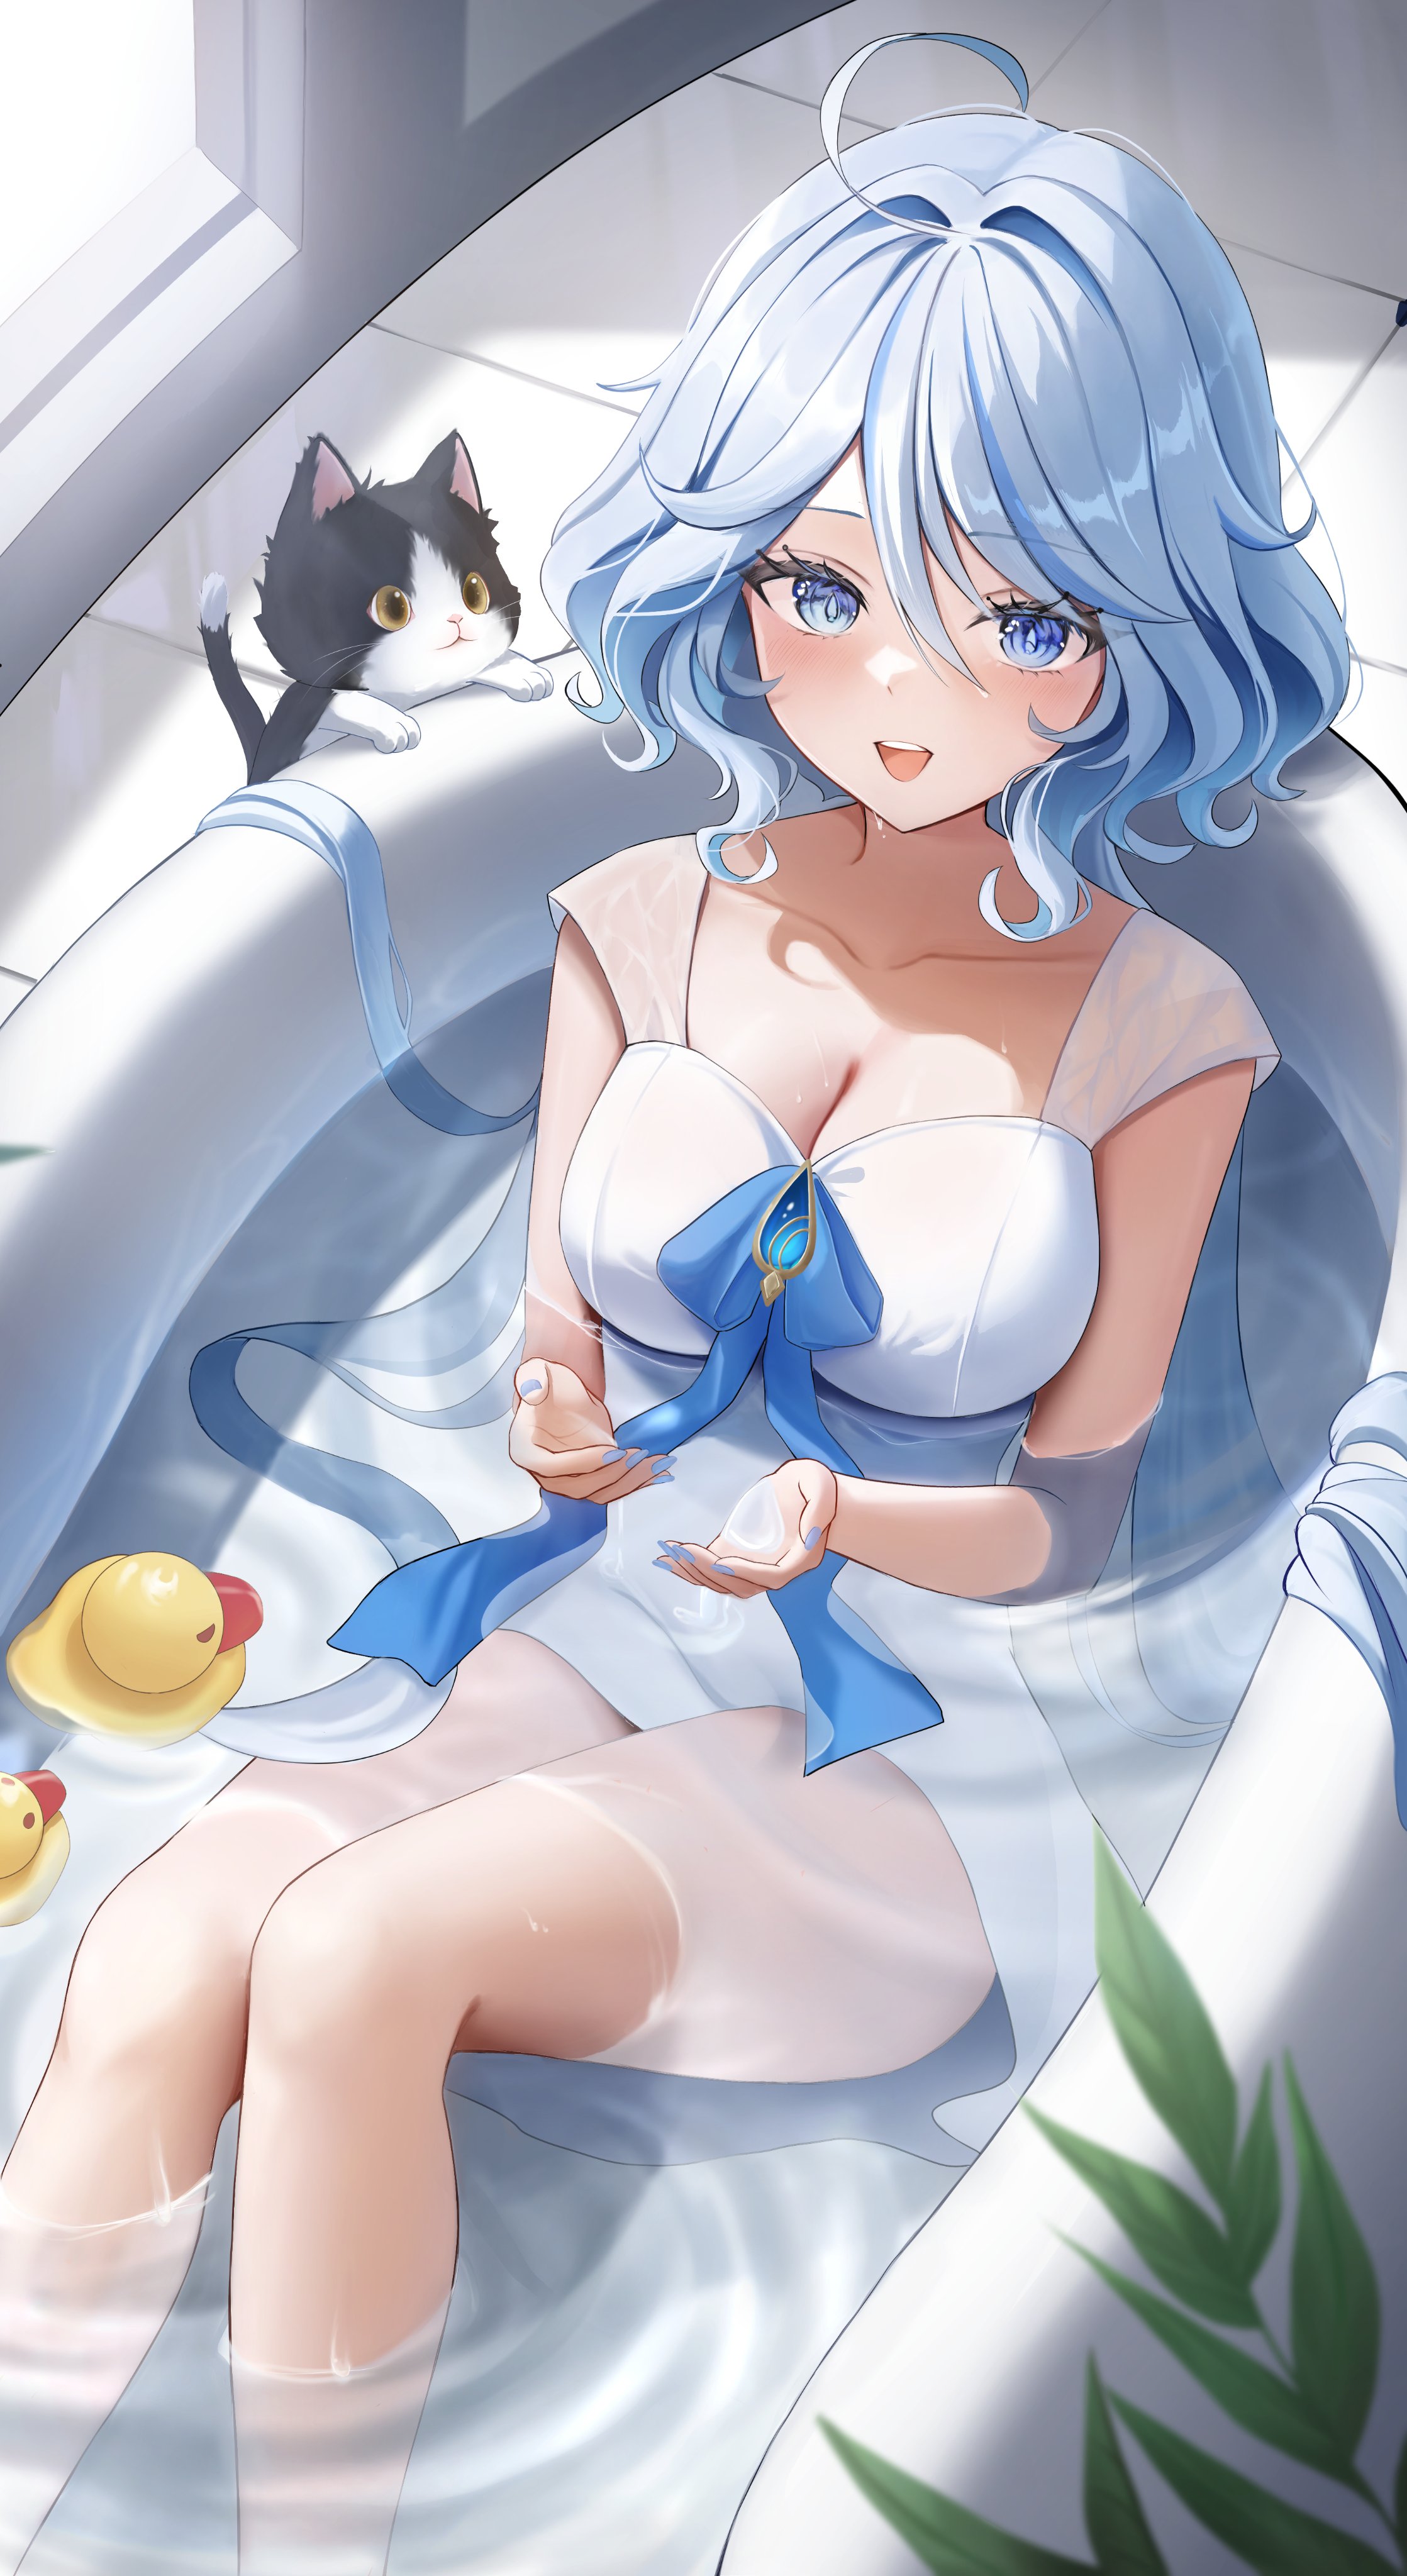 Anime 2237x4096 anime anime girls Furina (Genshin Impact) Genshin Impact bathing bathtub in bathtub rubber ducks cats blue hair blue eyes painted nails blue nails cleavage collarbone blushing open mouth water looking at viewer indoors American shot window portrait display hini ni leaves